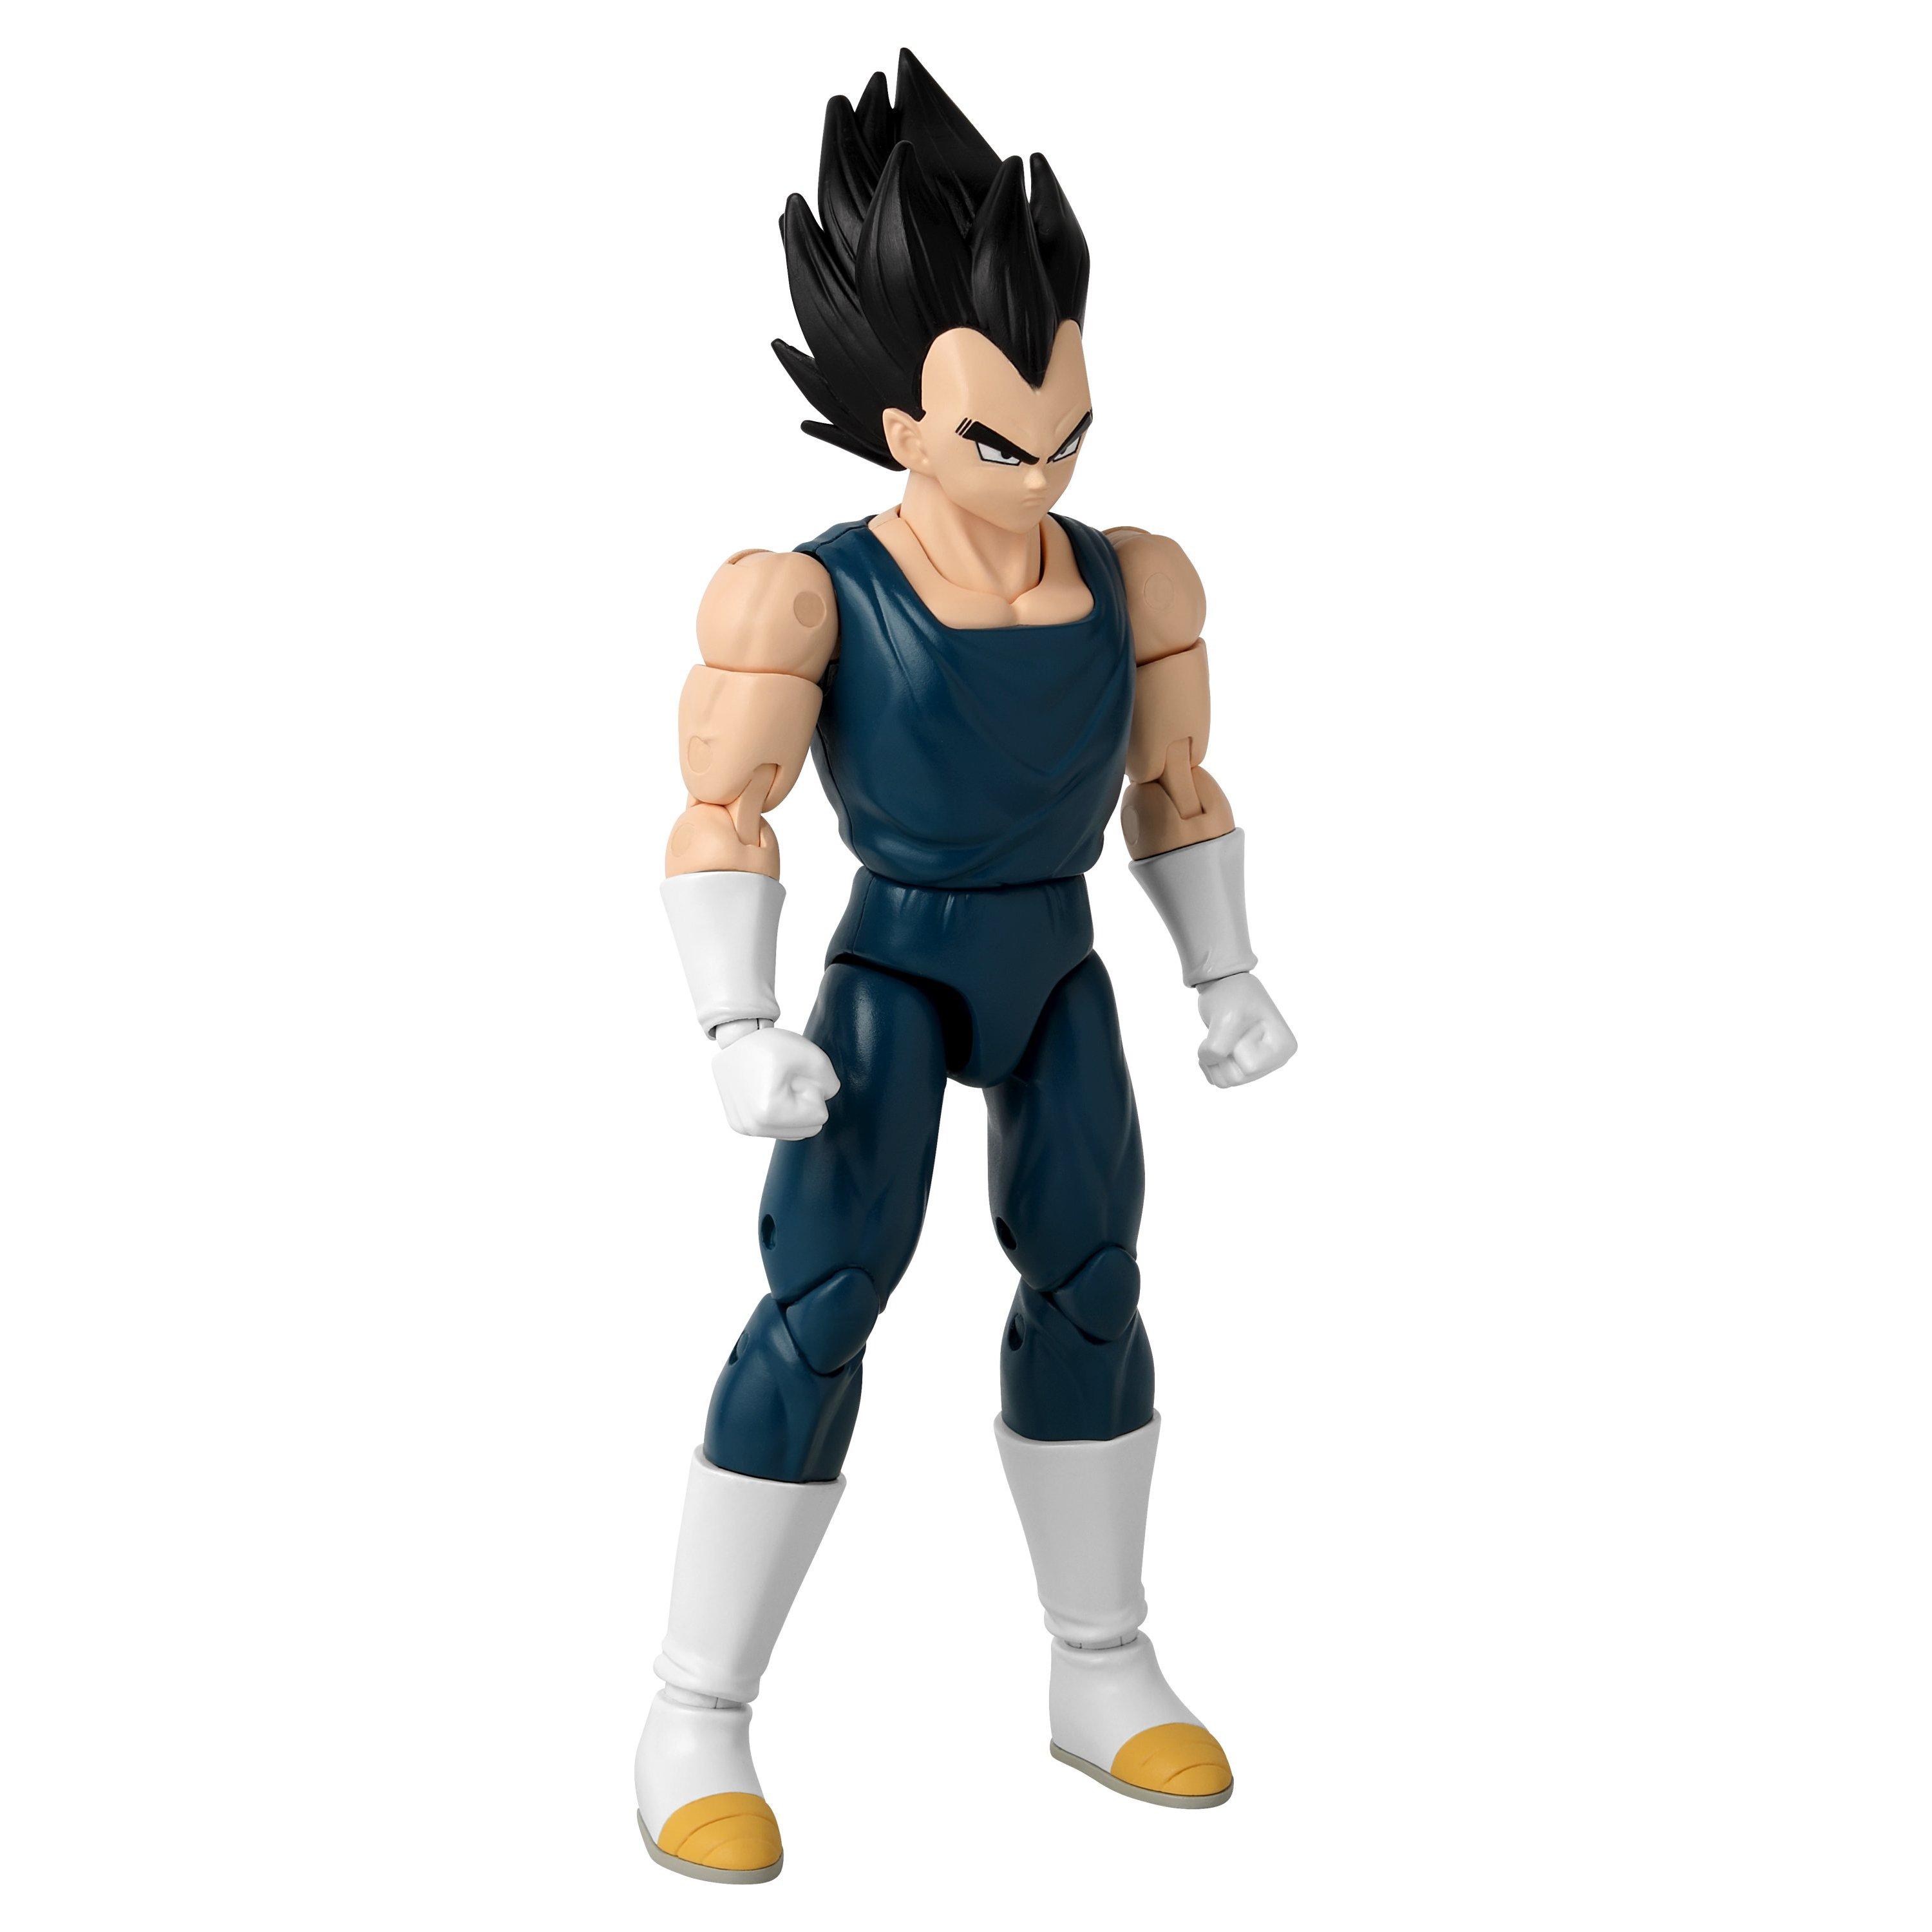 [PREORDER CLOSED] Dragon Ball SHF Figure Kit [FOREST HOUSE] - Super Sa